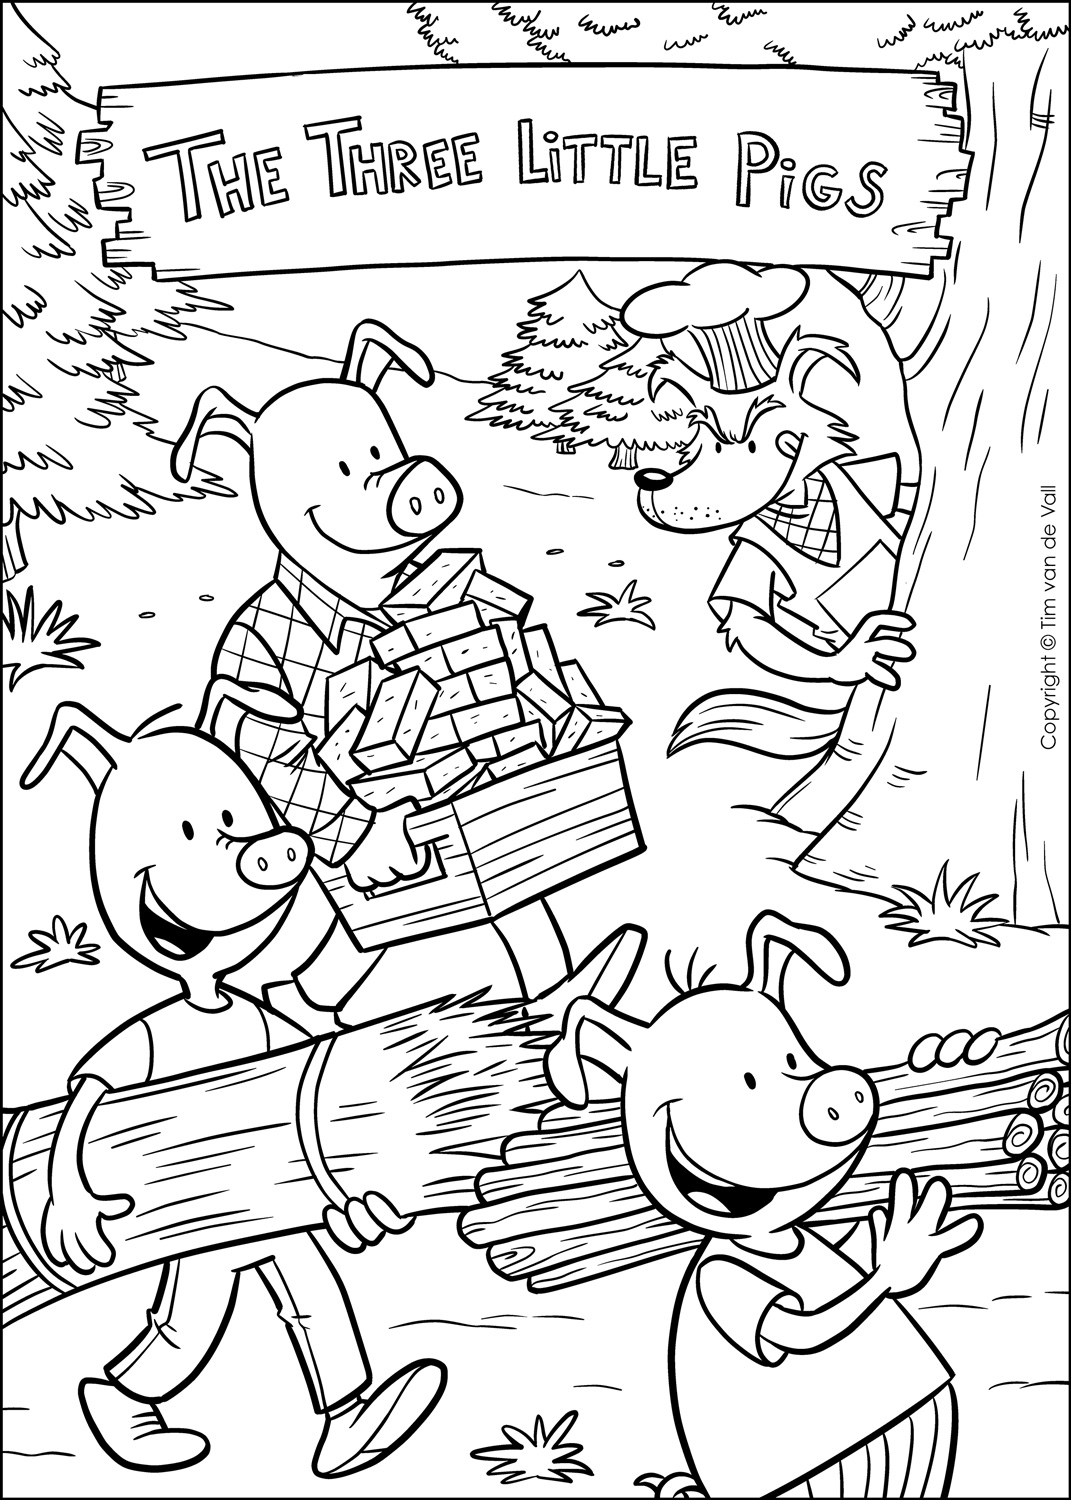 Story Coloring Pages Three Little Pigs Coloring Pages The Three Little Pigs Story